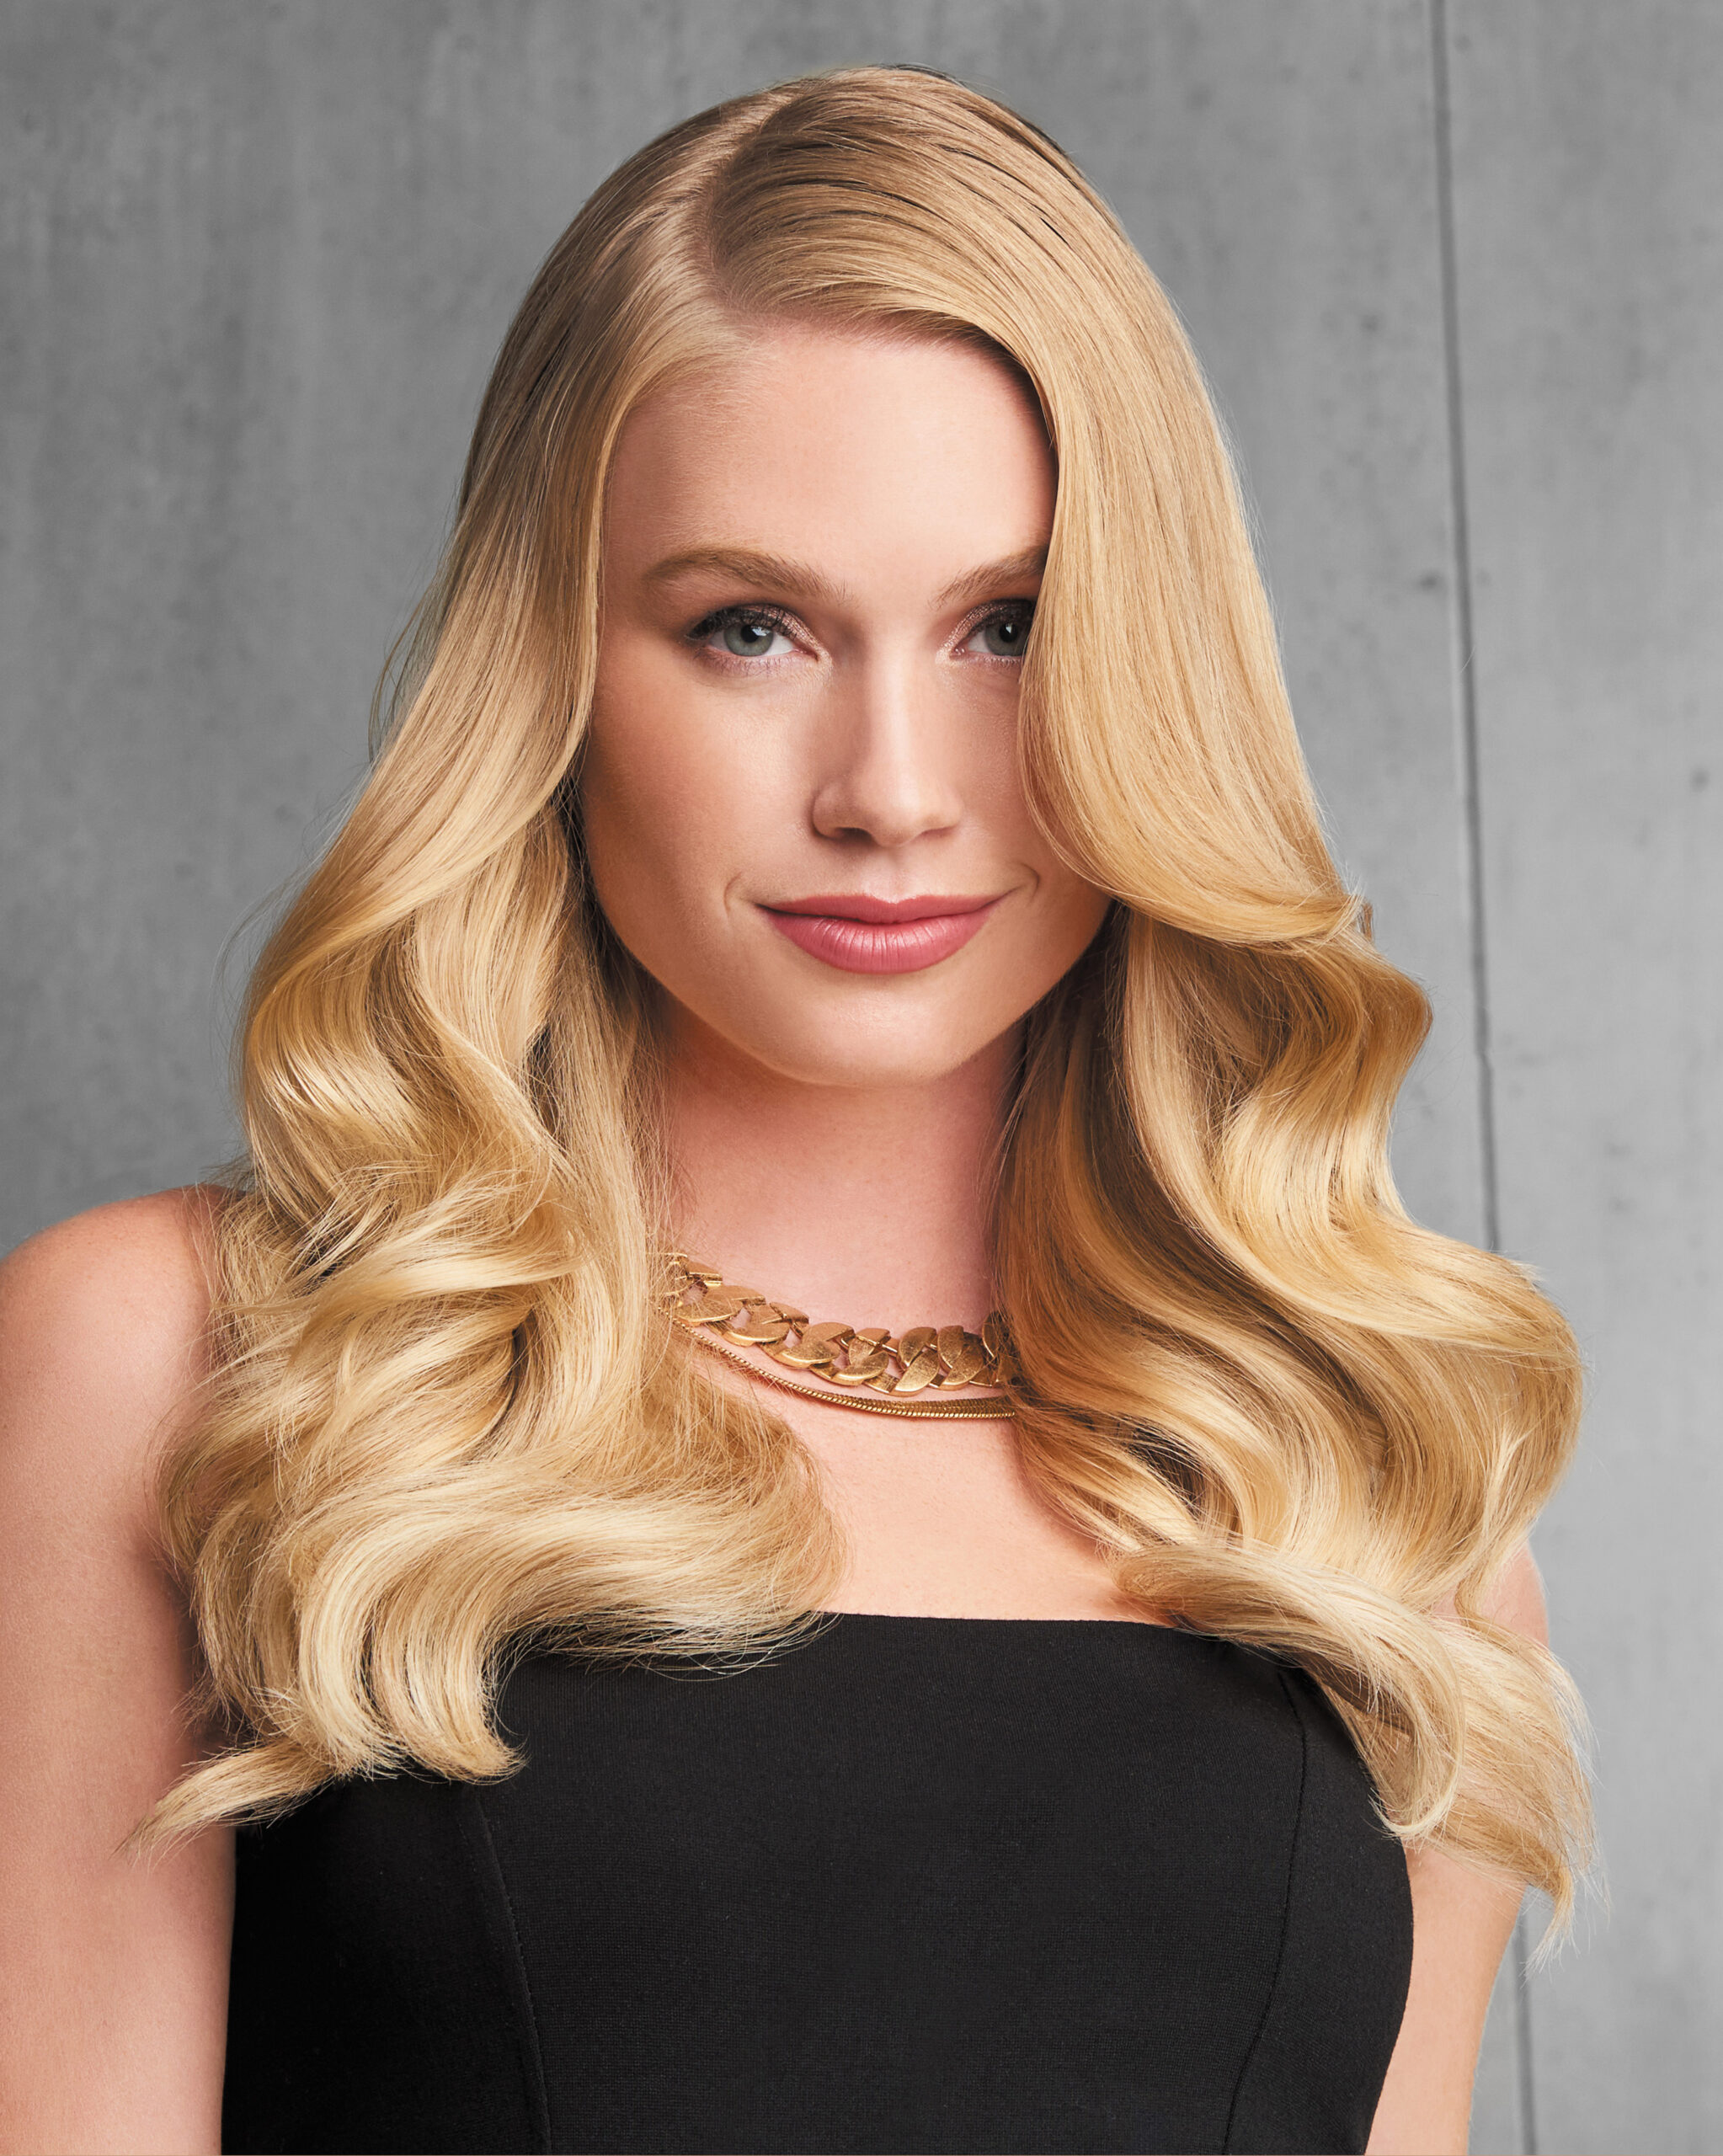 16" 10-Piece Human Hair Fineline Extension Kit in R25 Ginger Blonde